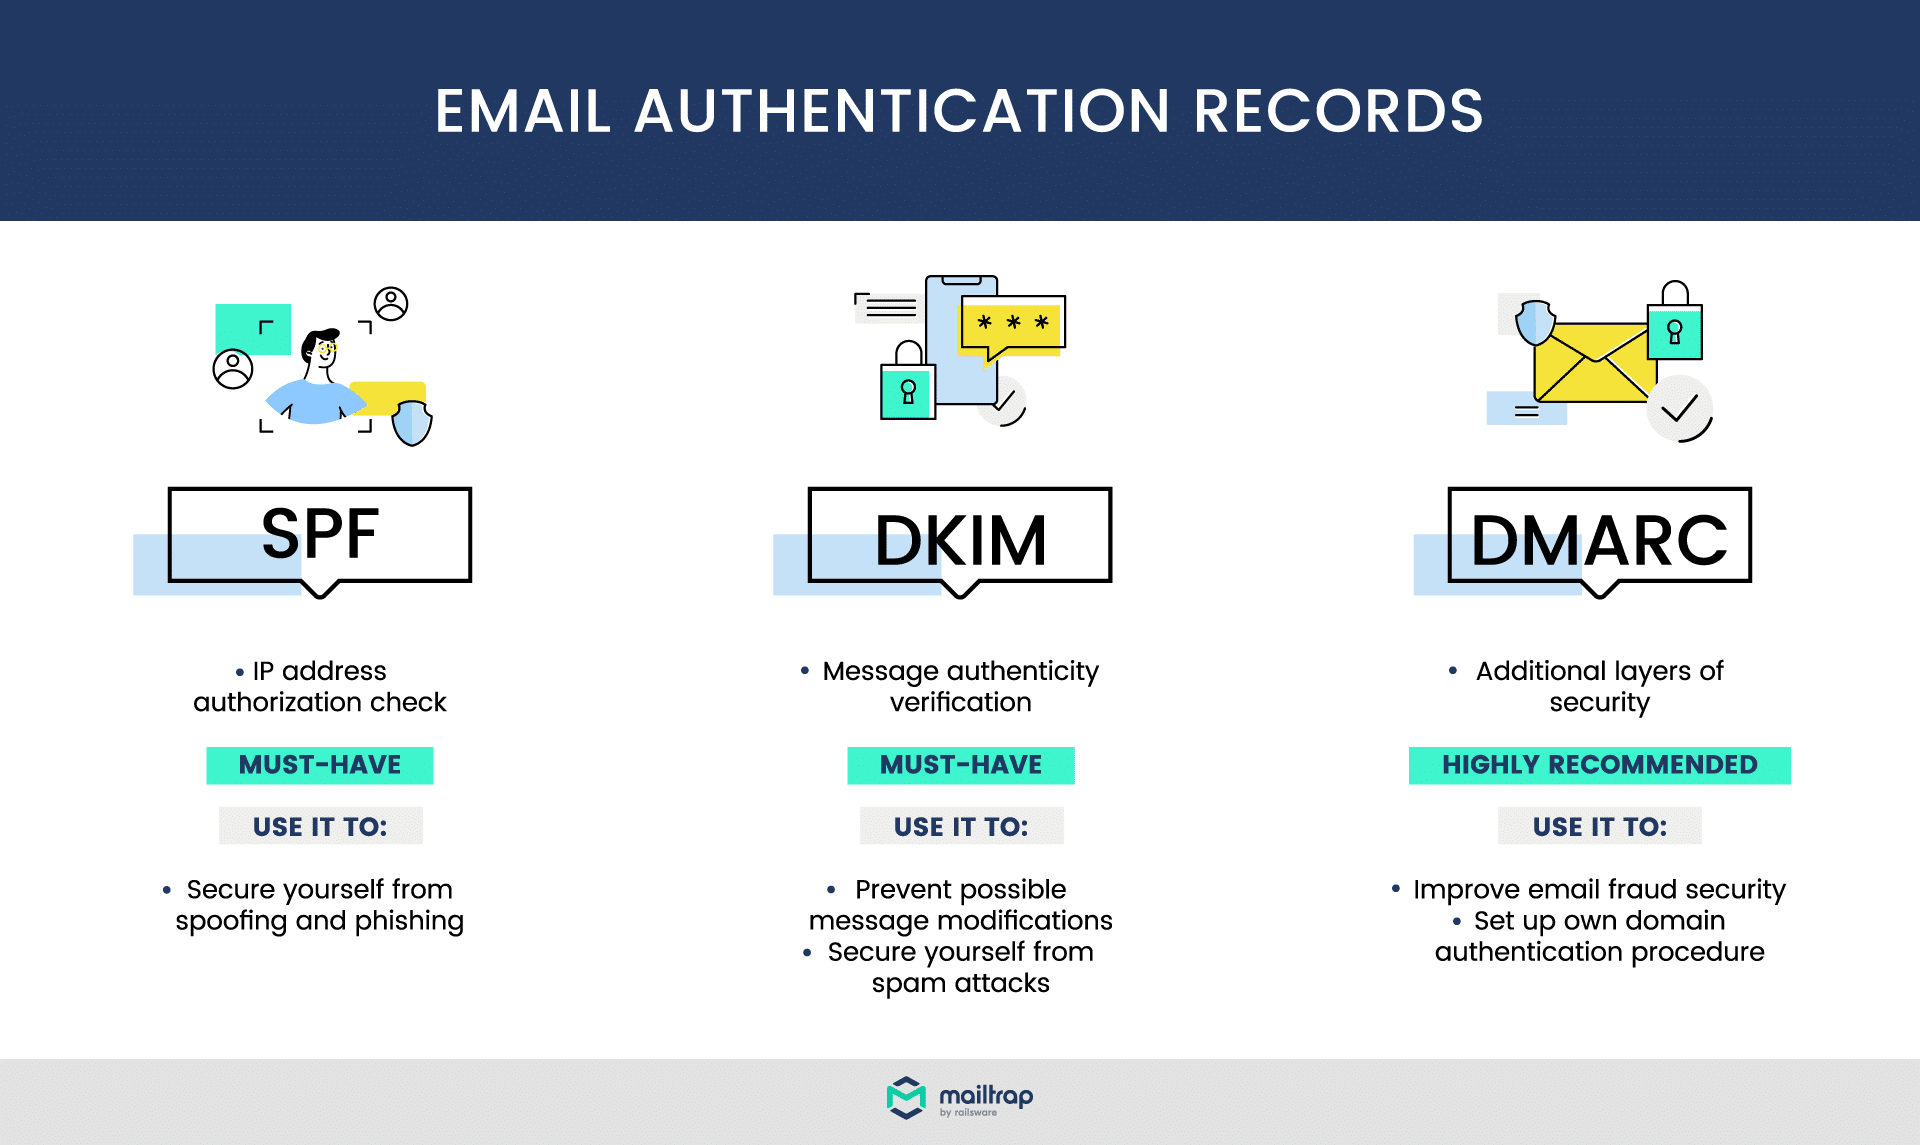 Email authentication records compared: SPF, DKIM, DMARC